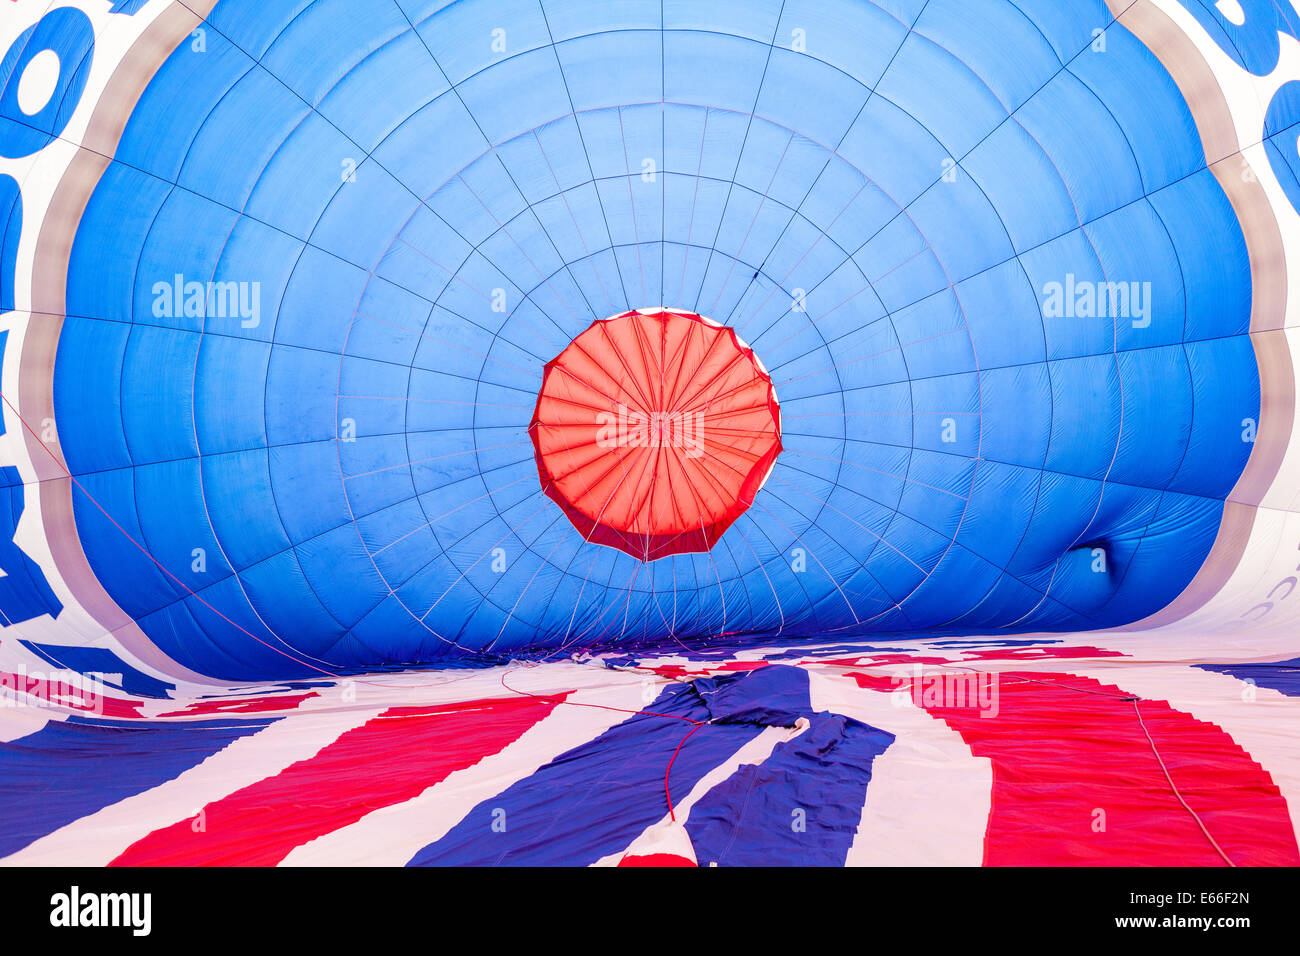 The hot air balloon is the oldest successful human-carrying flight technology. Stock Photo